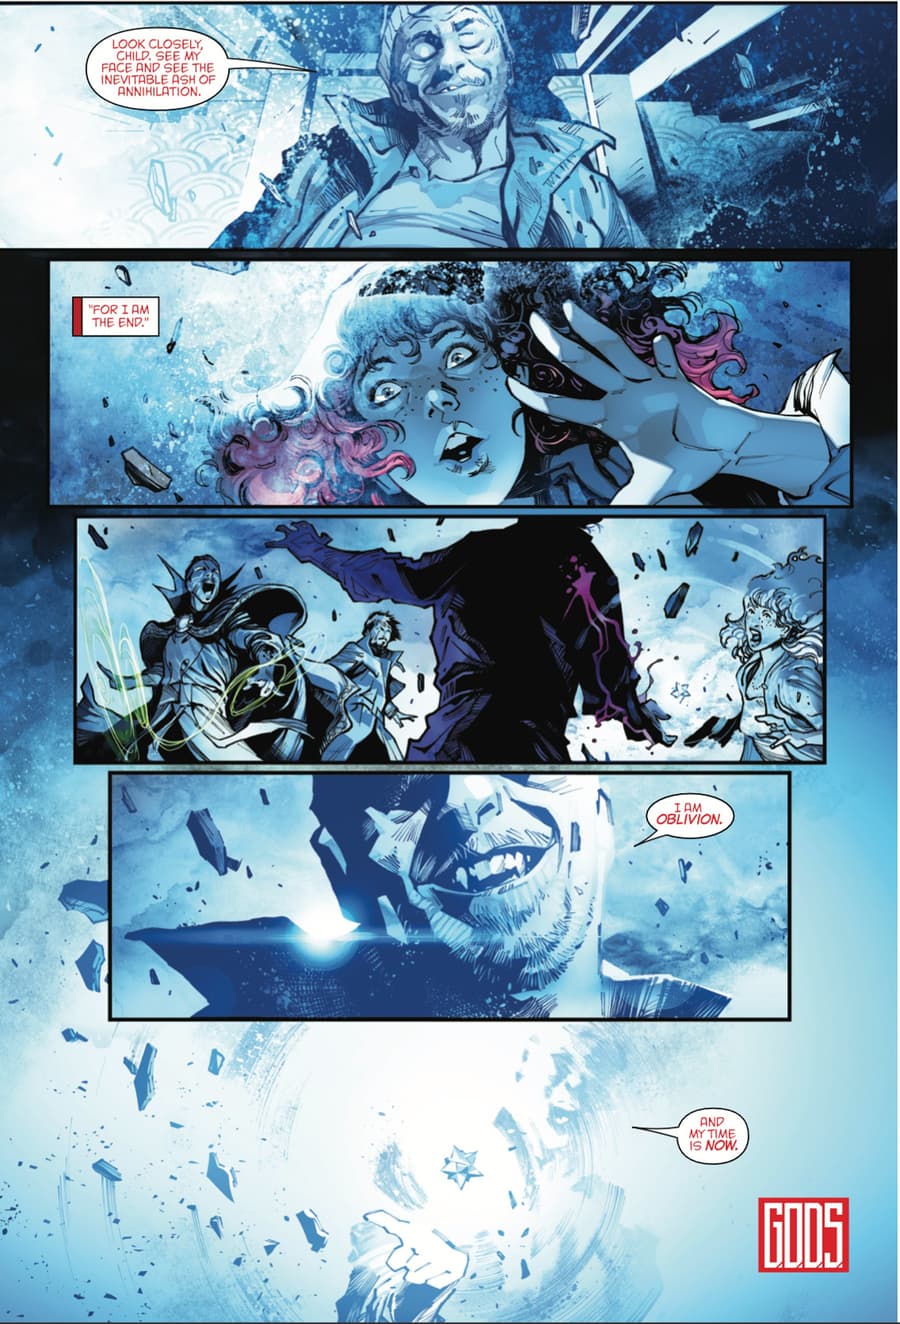 G.O.D.S. (2023) #3 page by Jonathan Hickman and Valerio Schiti